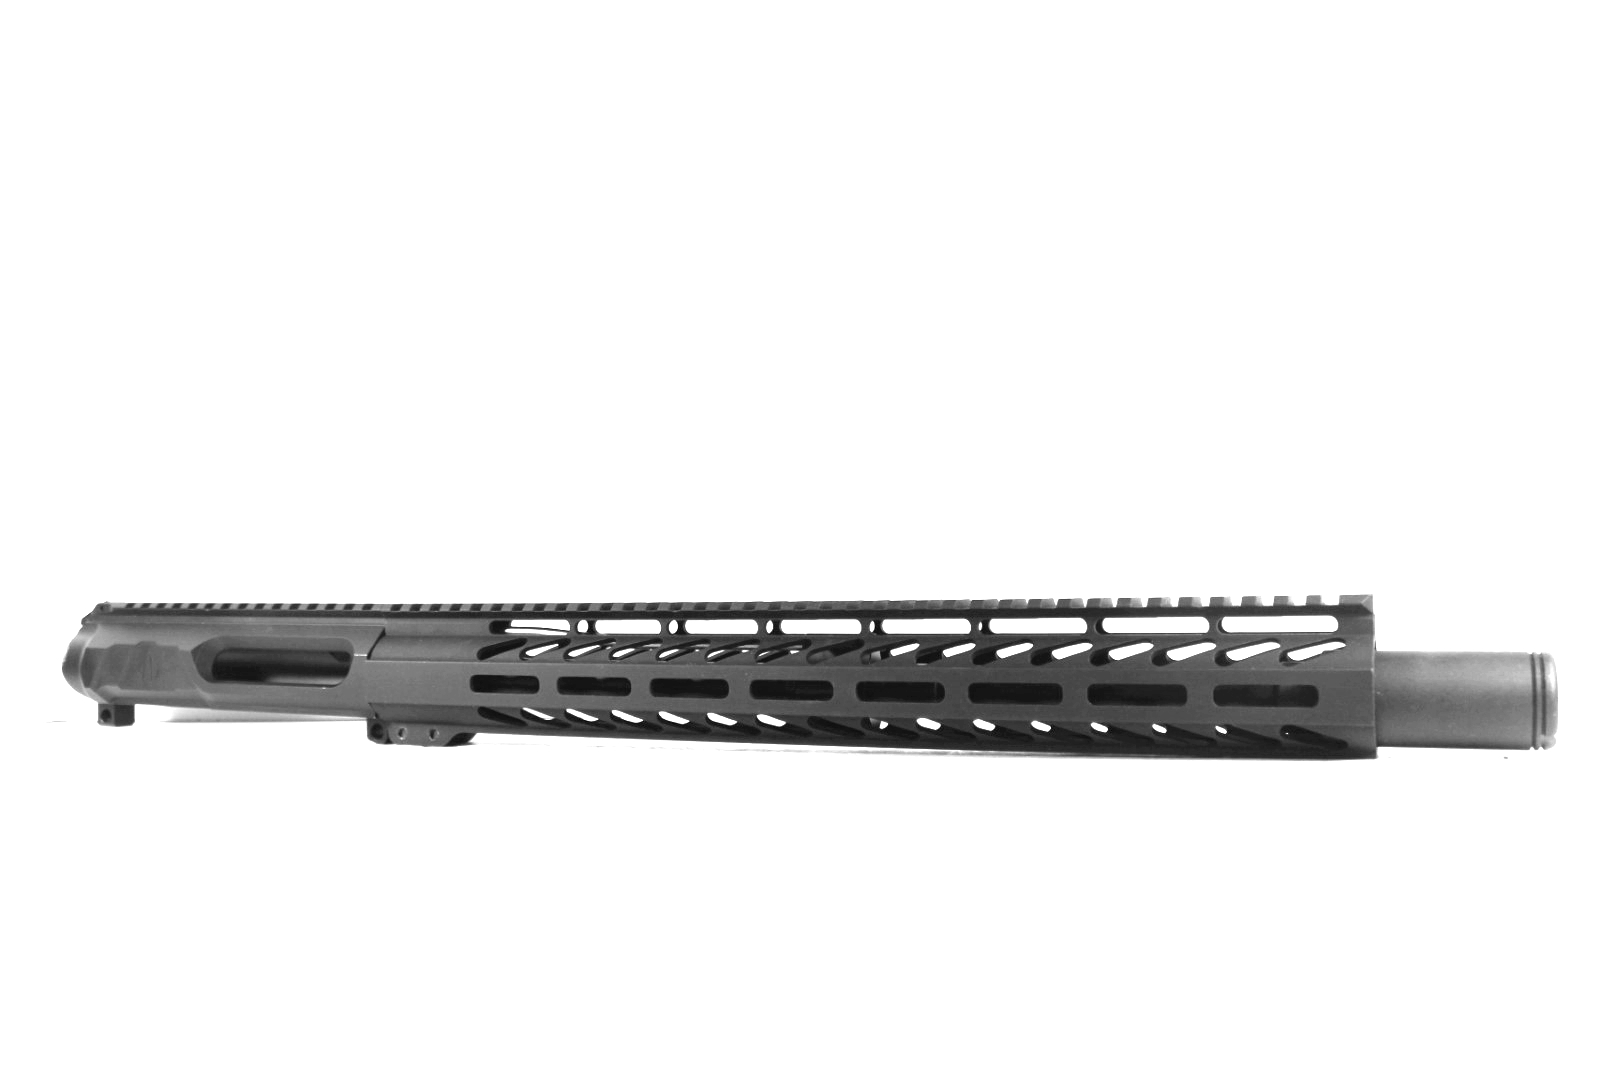 14.5 inch AR-15 Non Reciprocating Side Charging 5.56 NATO (223/5.56) Carbine Melonite Upper with Flash Can